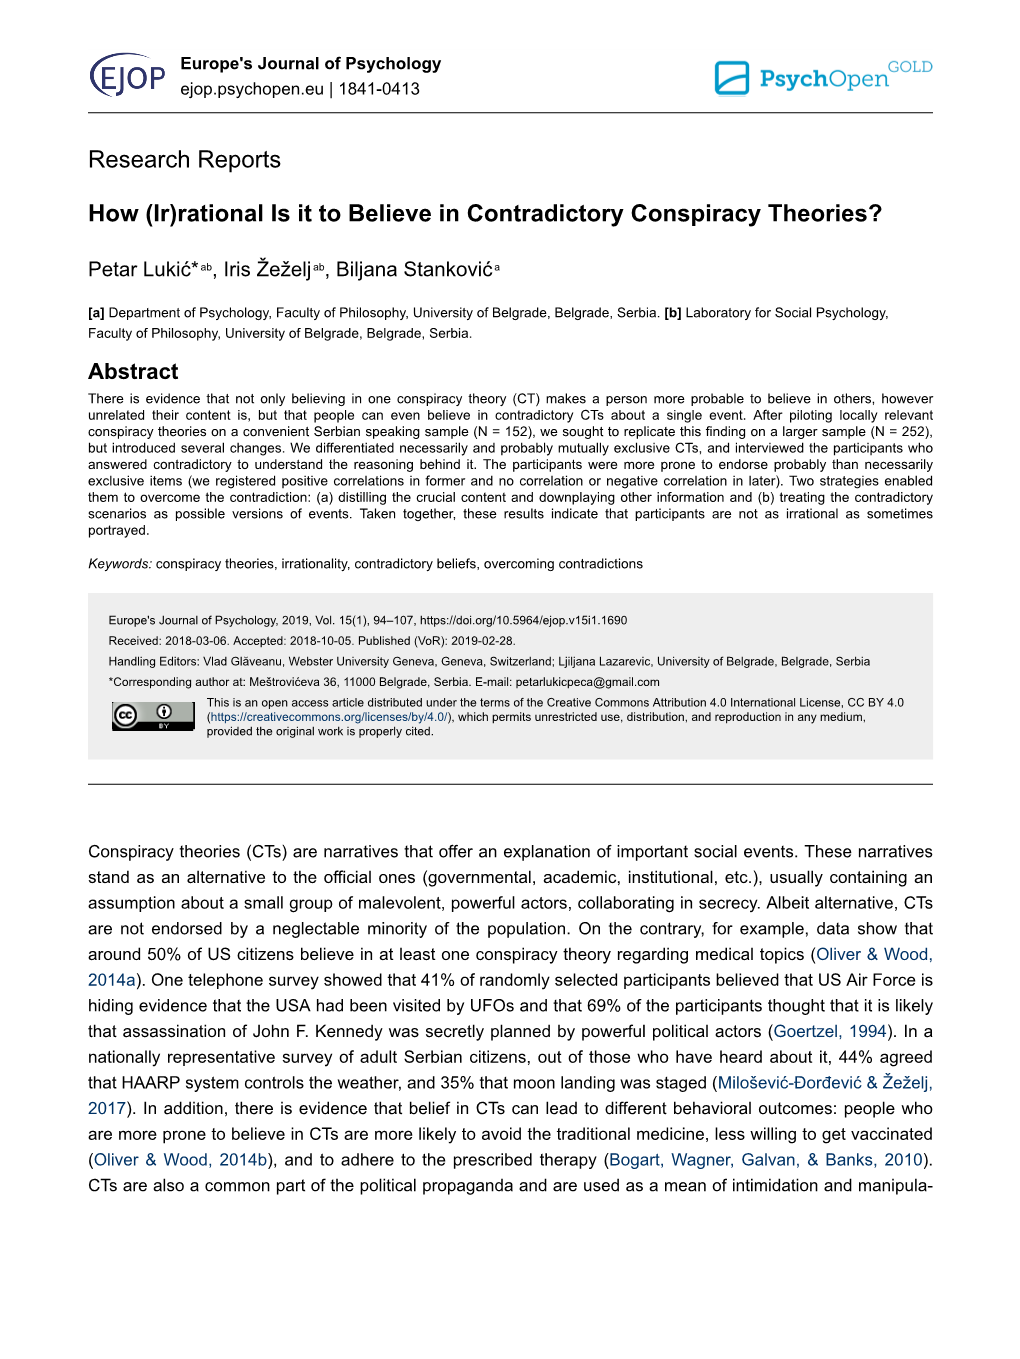 Rational Is It to Believe in Contradictory Conspiracy Theories?